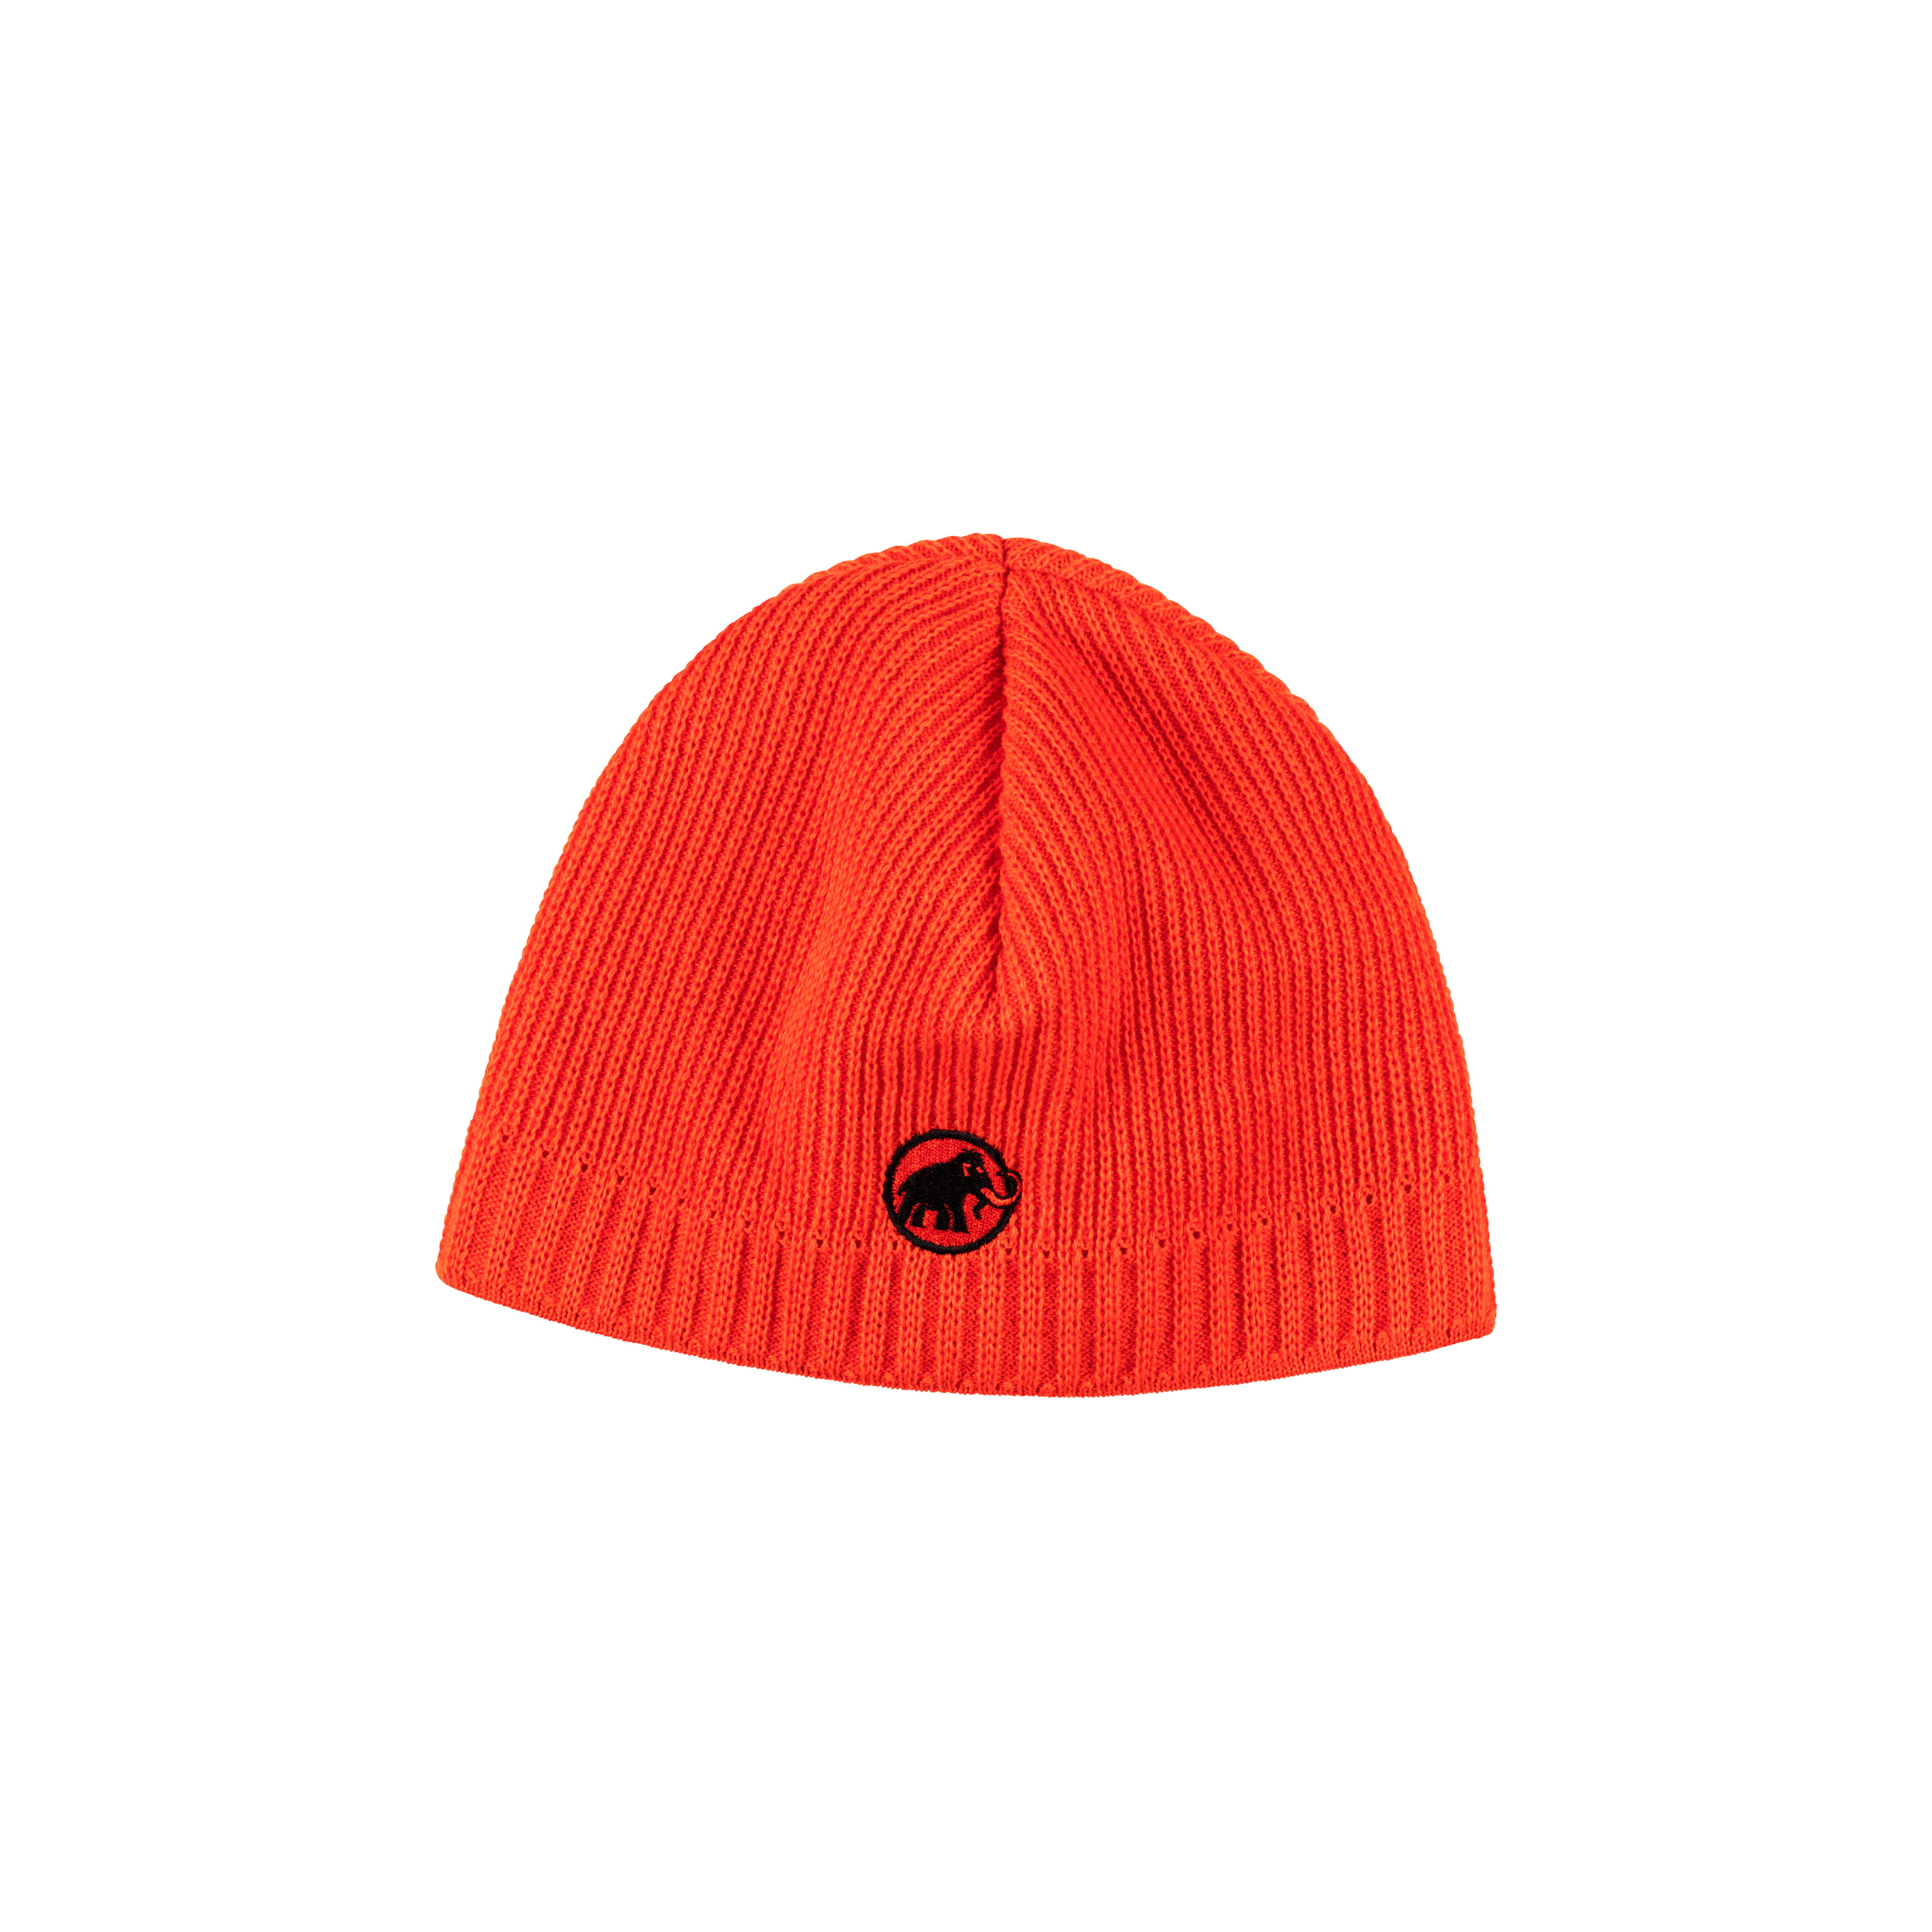 Sublime Beanie - hot red thumbnail